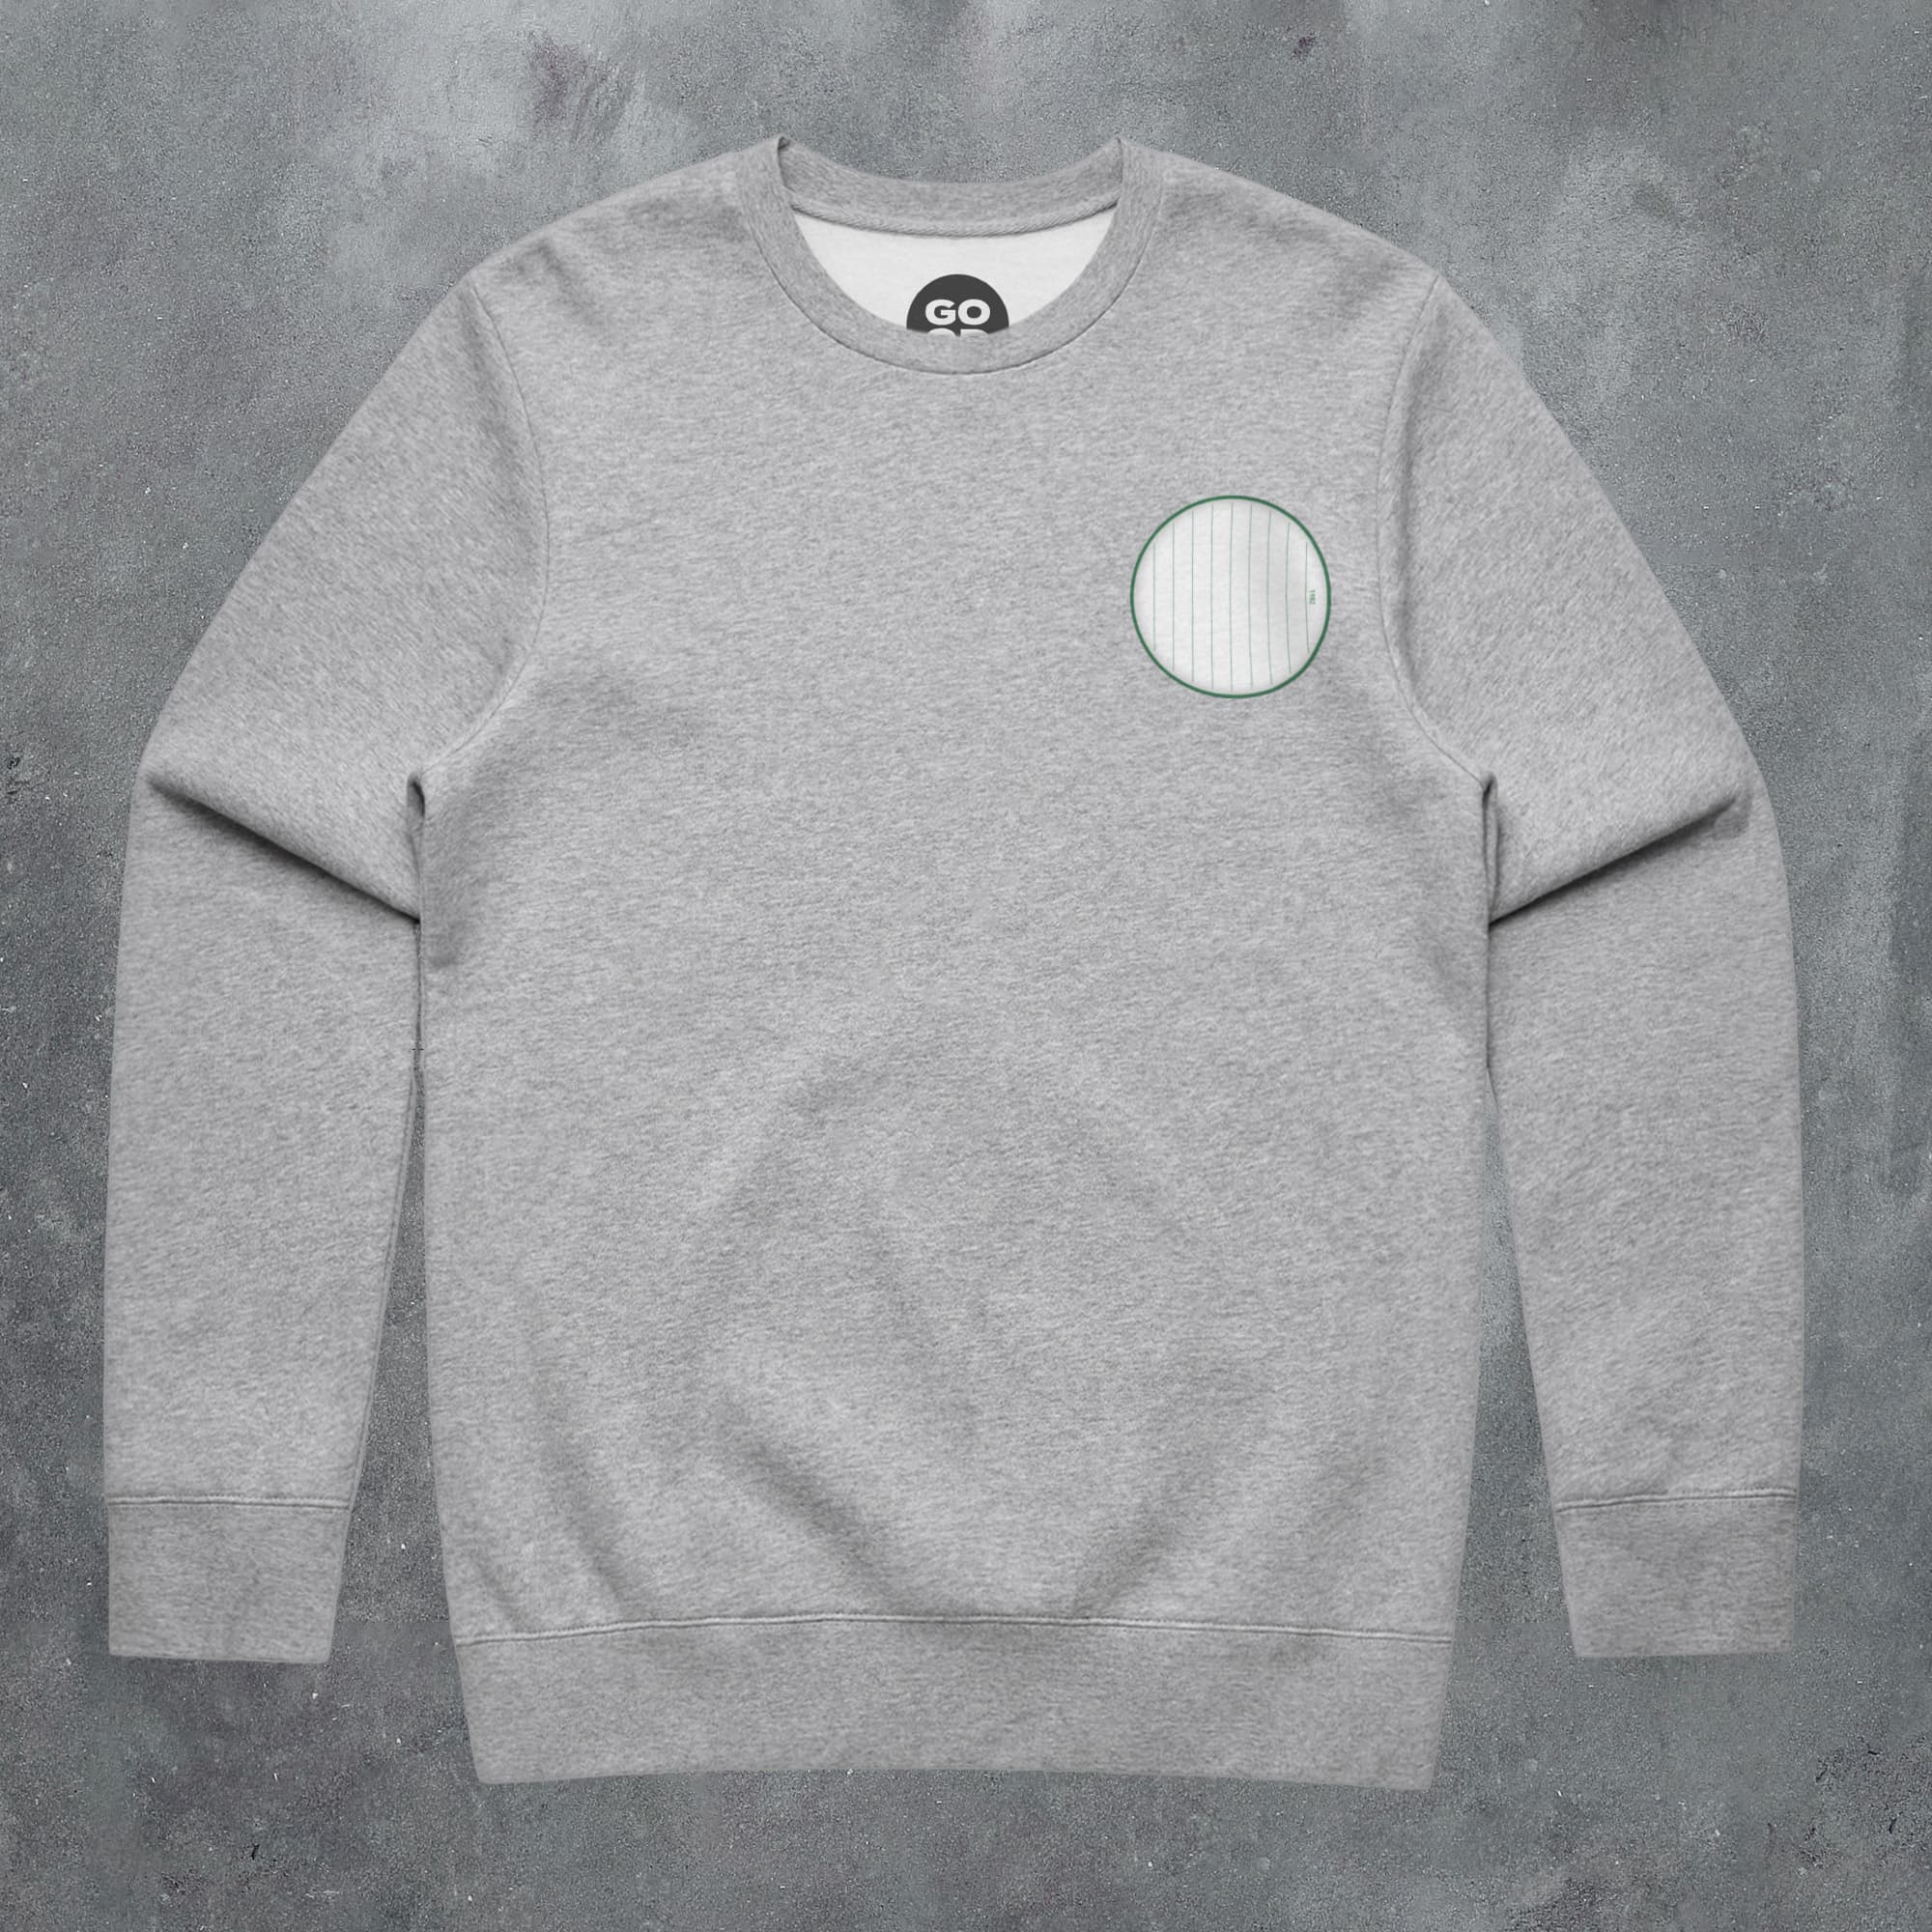 a grey sweatshirt with a green circle on the front